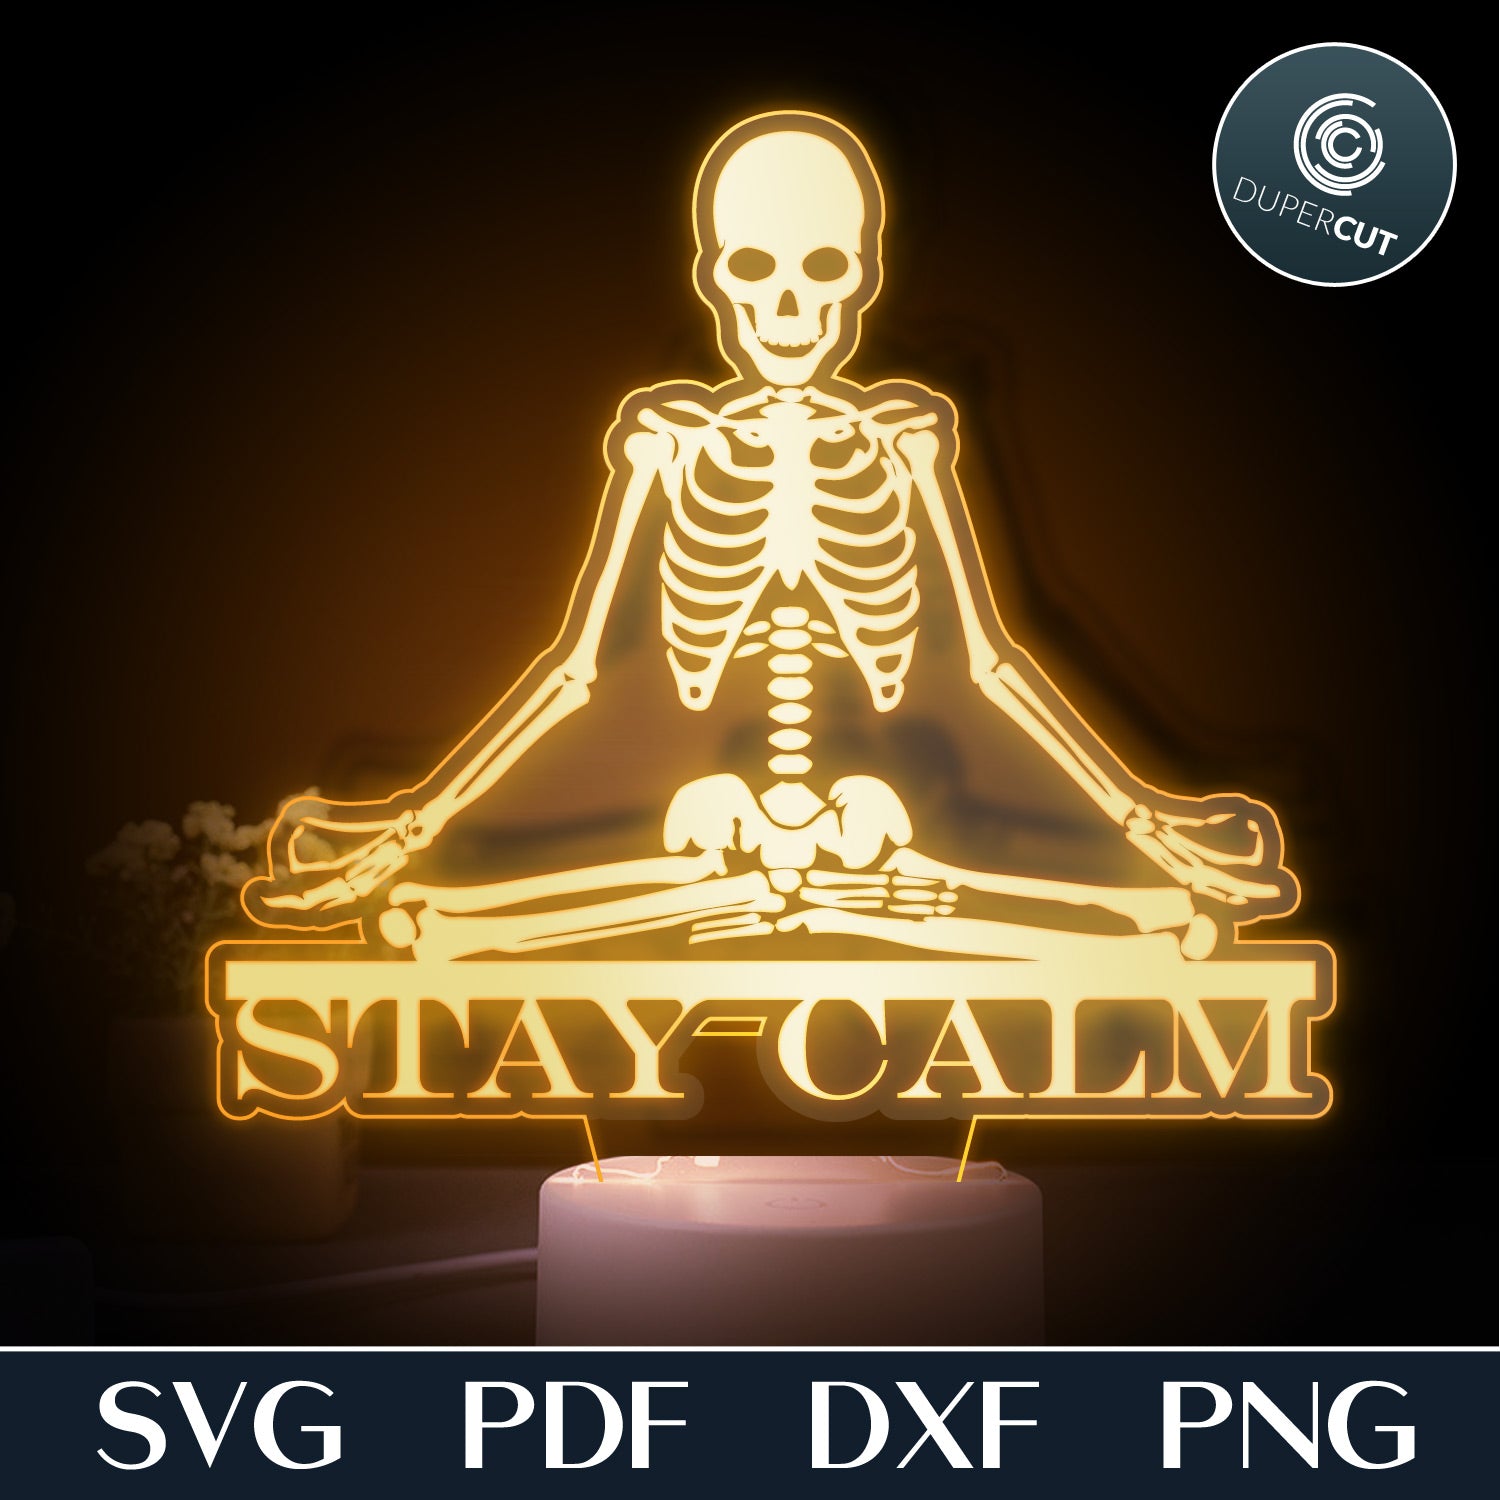 Stay Calm meditating skeleton - DIY LED acrylic lamp template, SVG PDF DXF files for laser engraving and cutting. For use with Glowforge, Cricut, silhouette cameo machines.